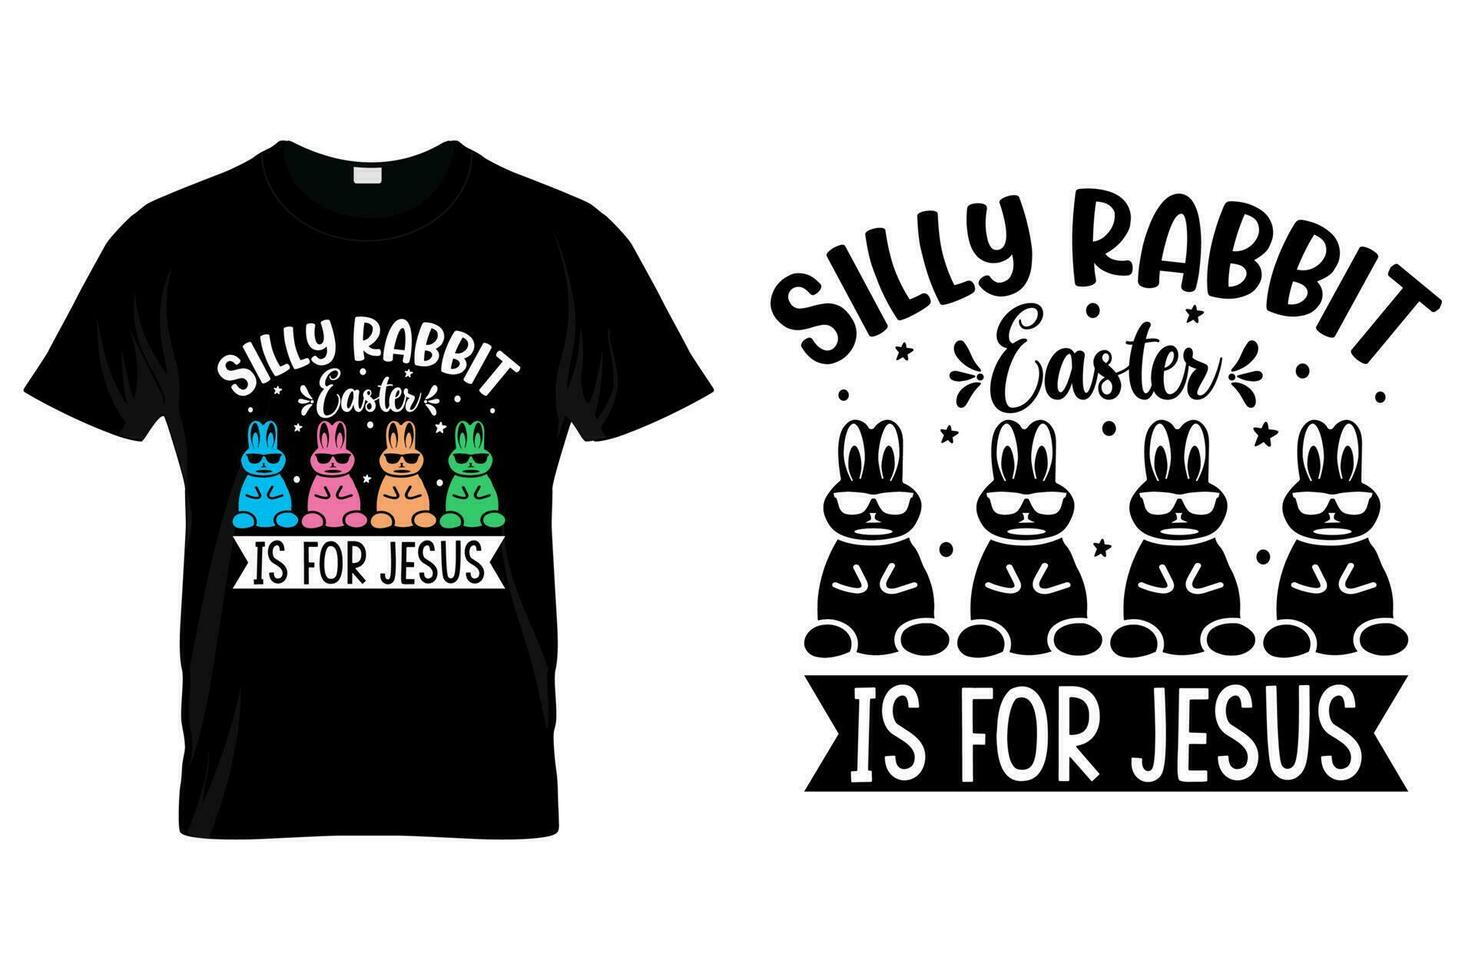 https://static.vecteezy.com/system/resources/previews/023/180/232/non_2x/easter-day-tshirt-design-easter-funny-quotes-tshirt-for-kids-men-women-poster-and-gift-free-vector.jpg